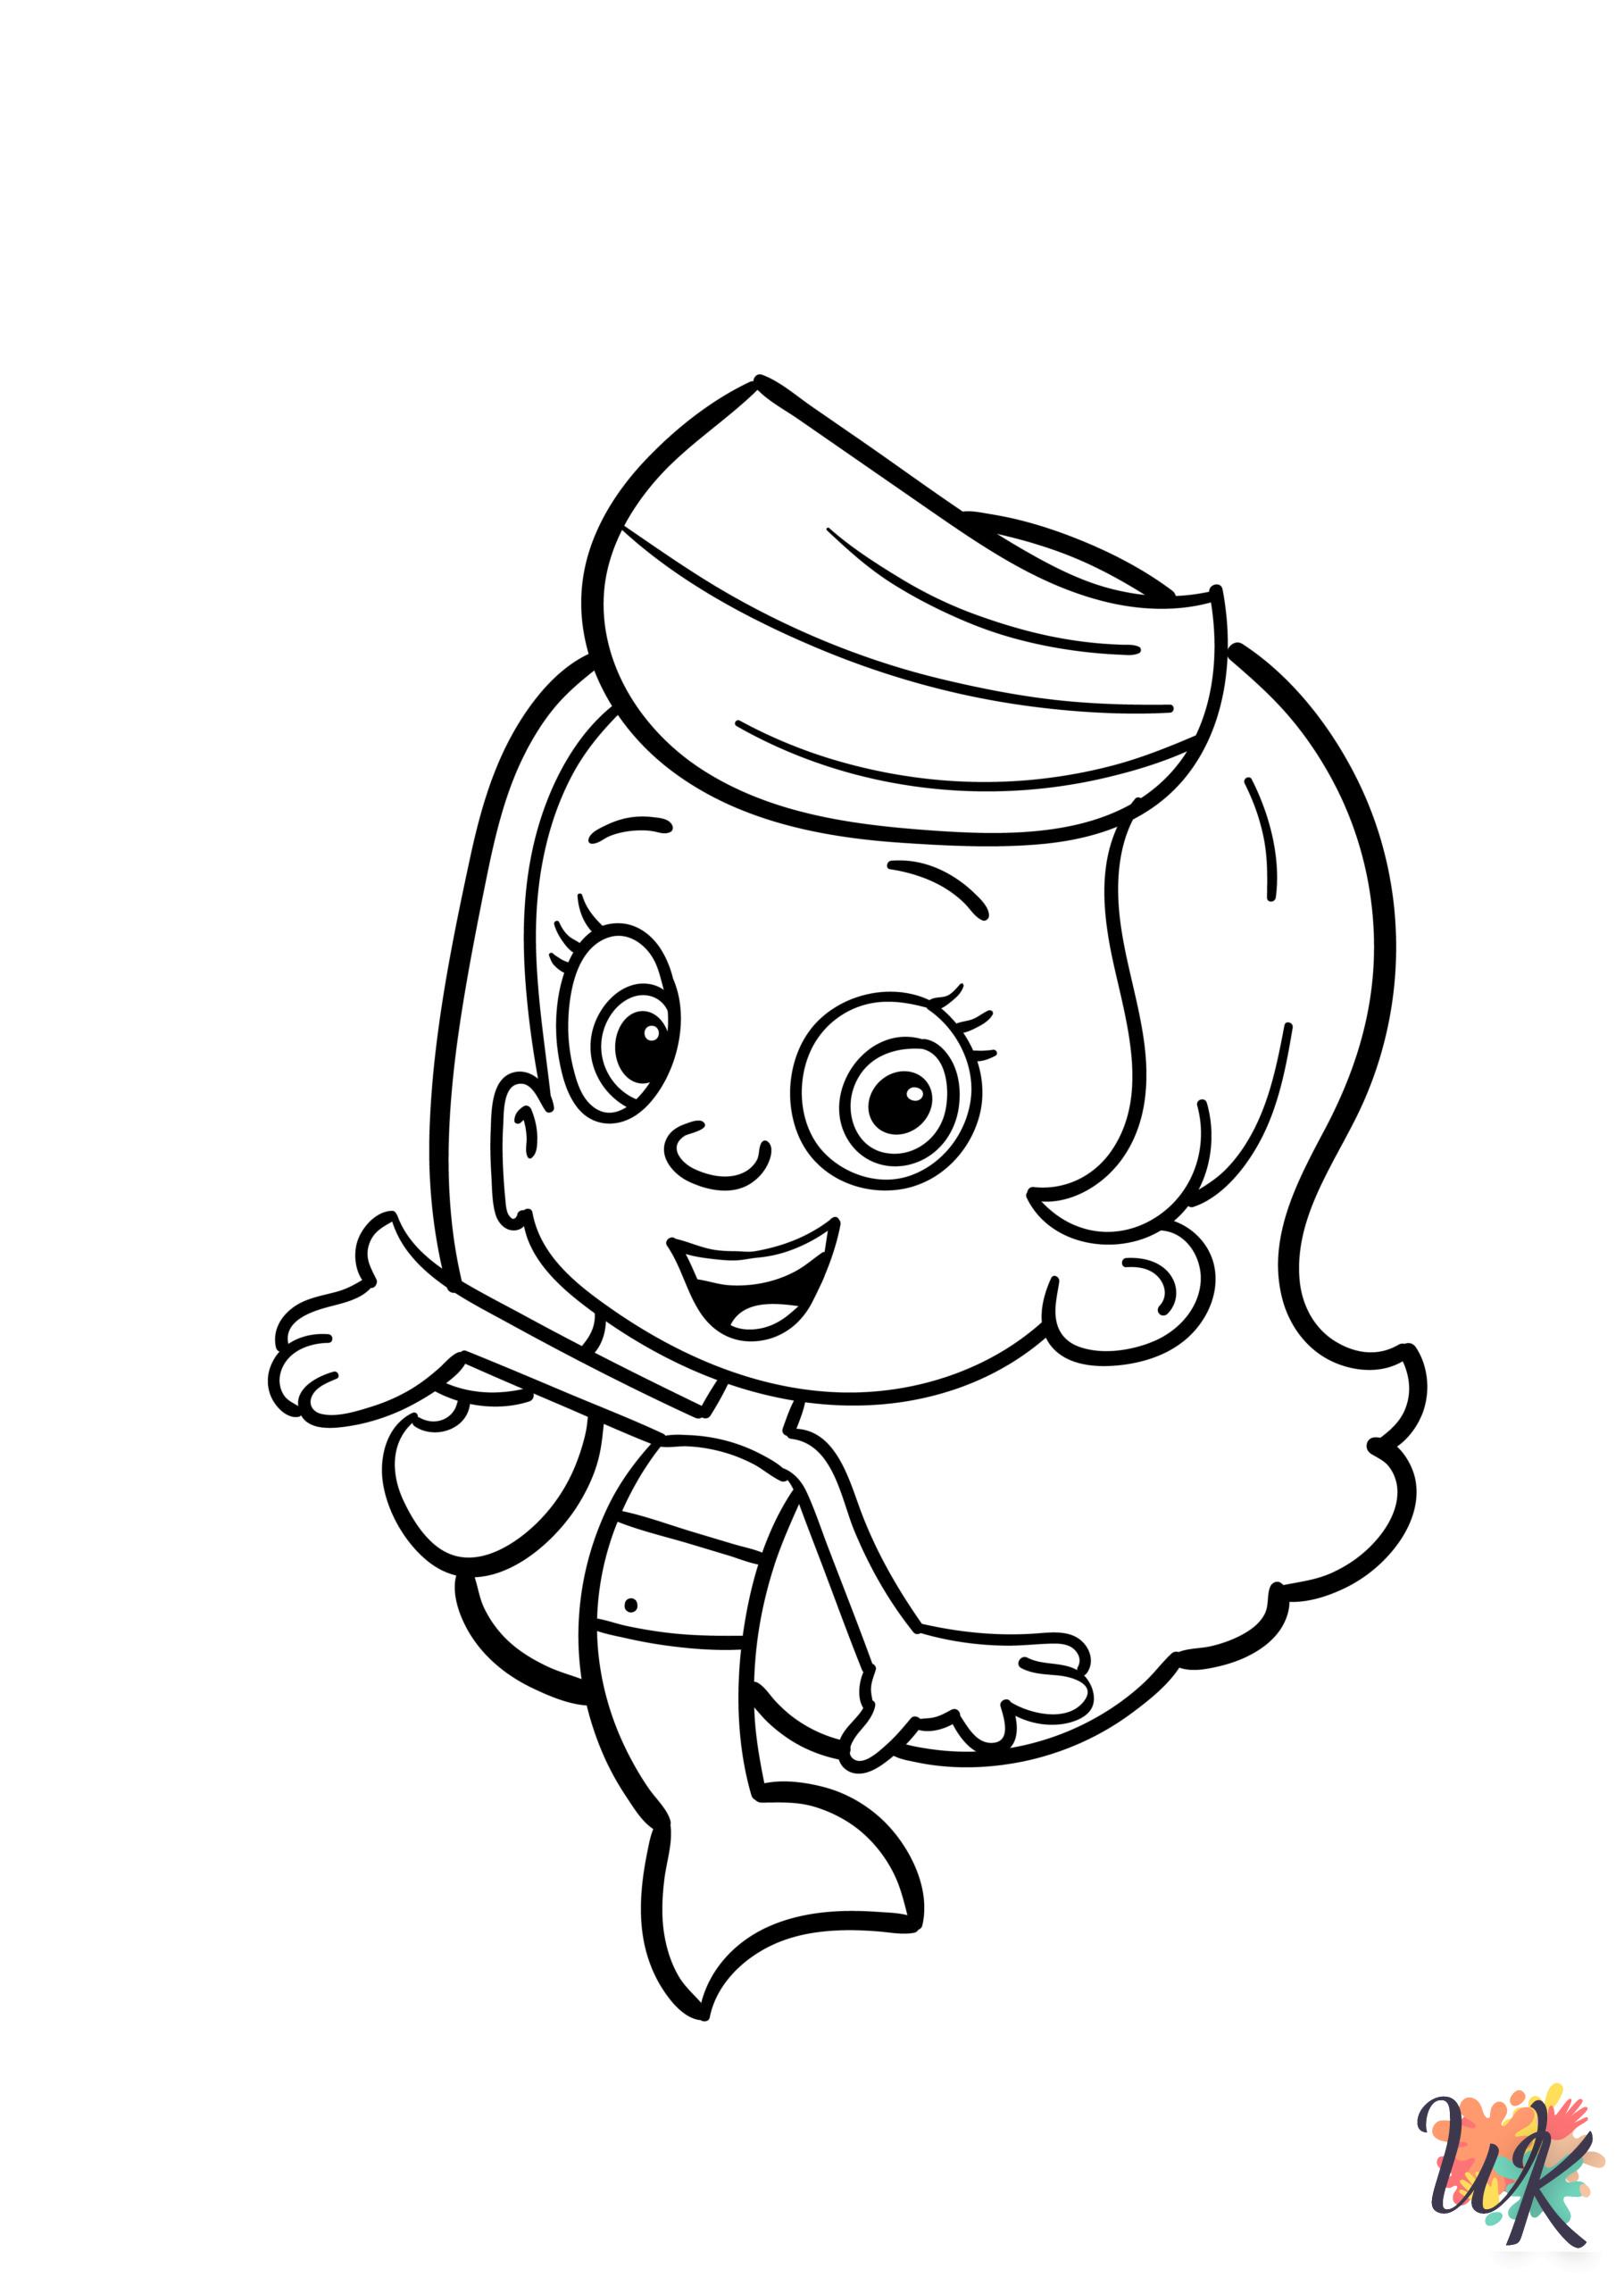 Bubble Guppies ornament coloring pages